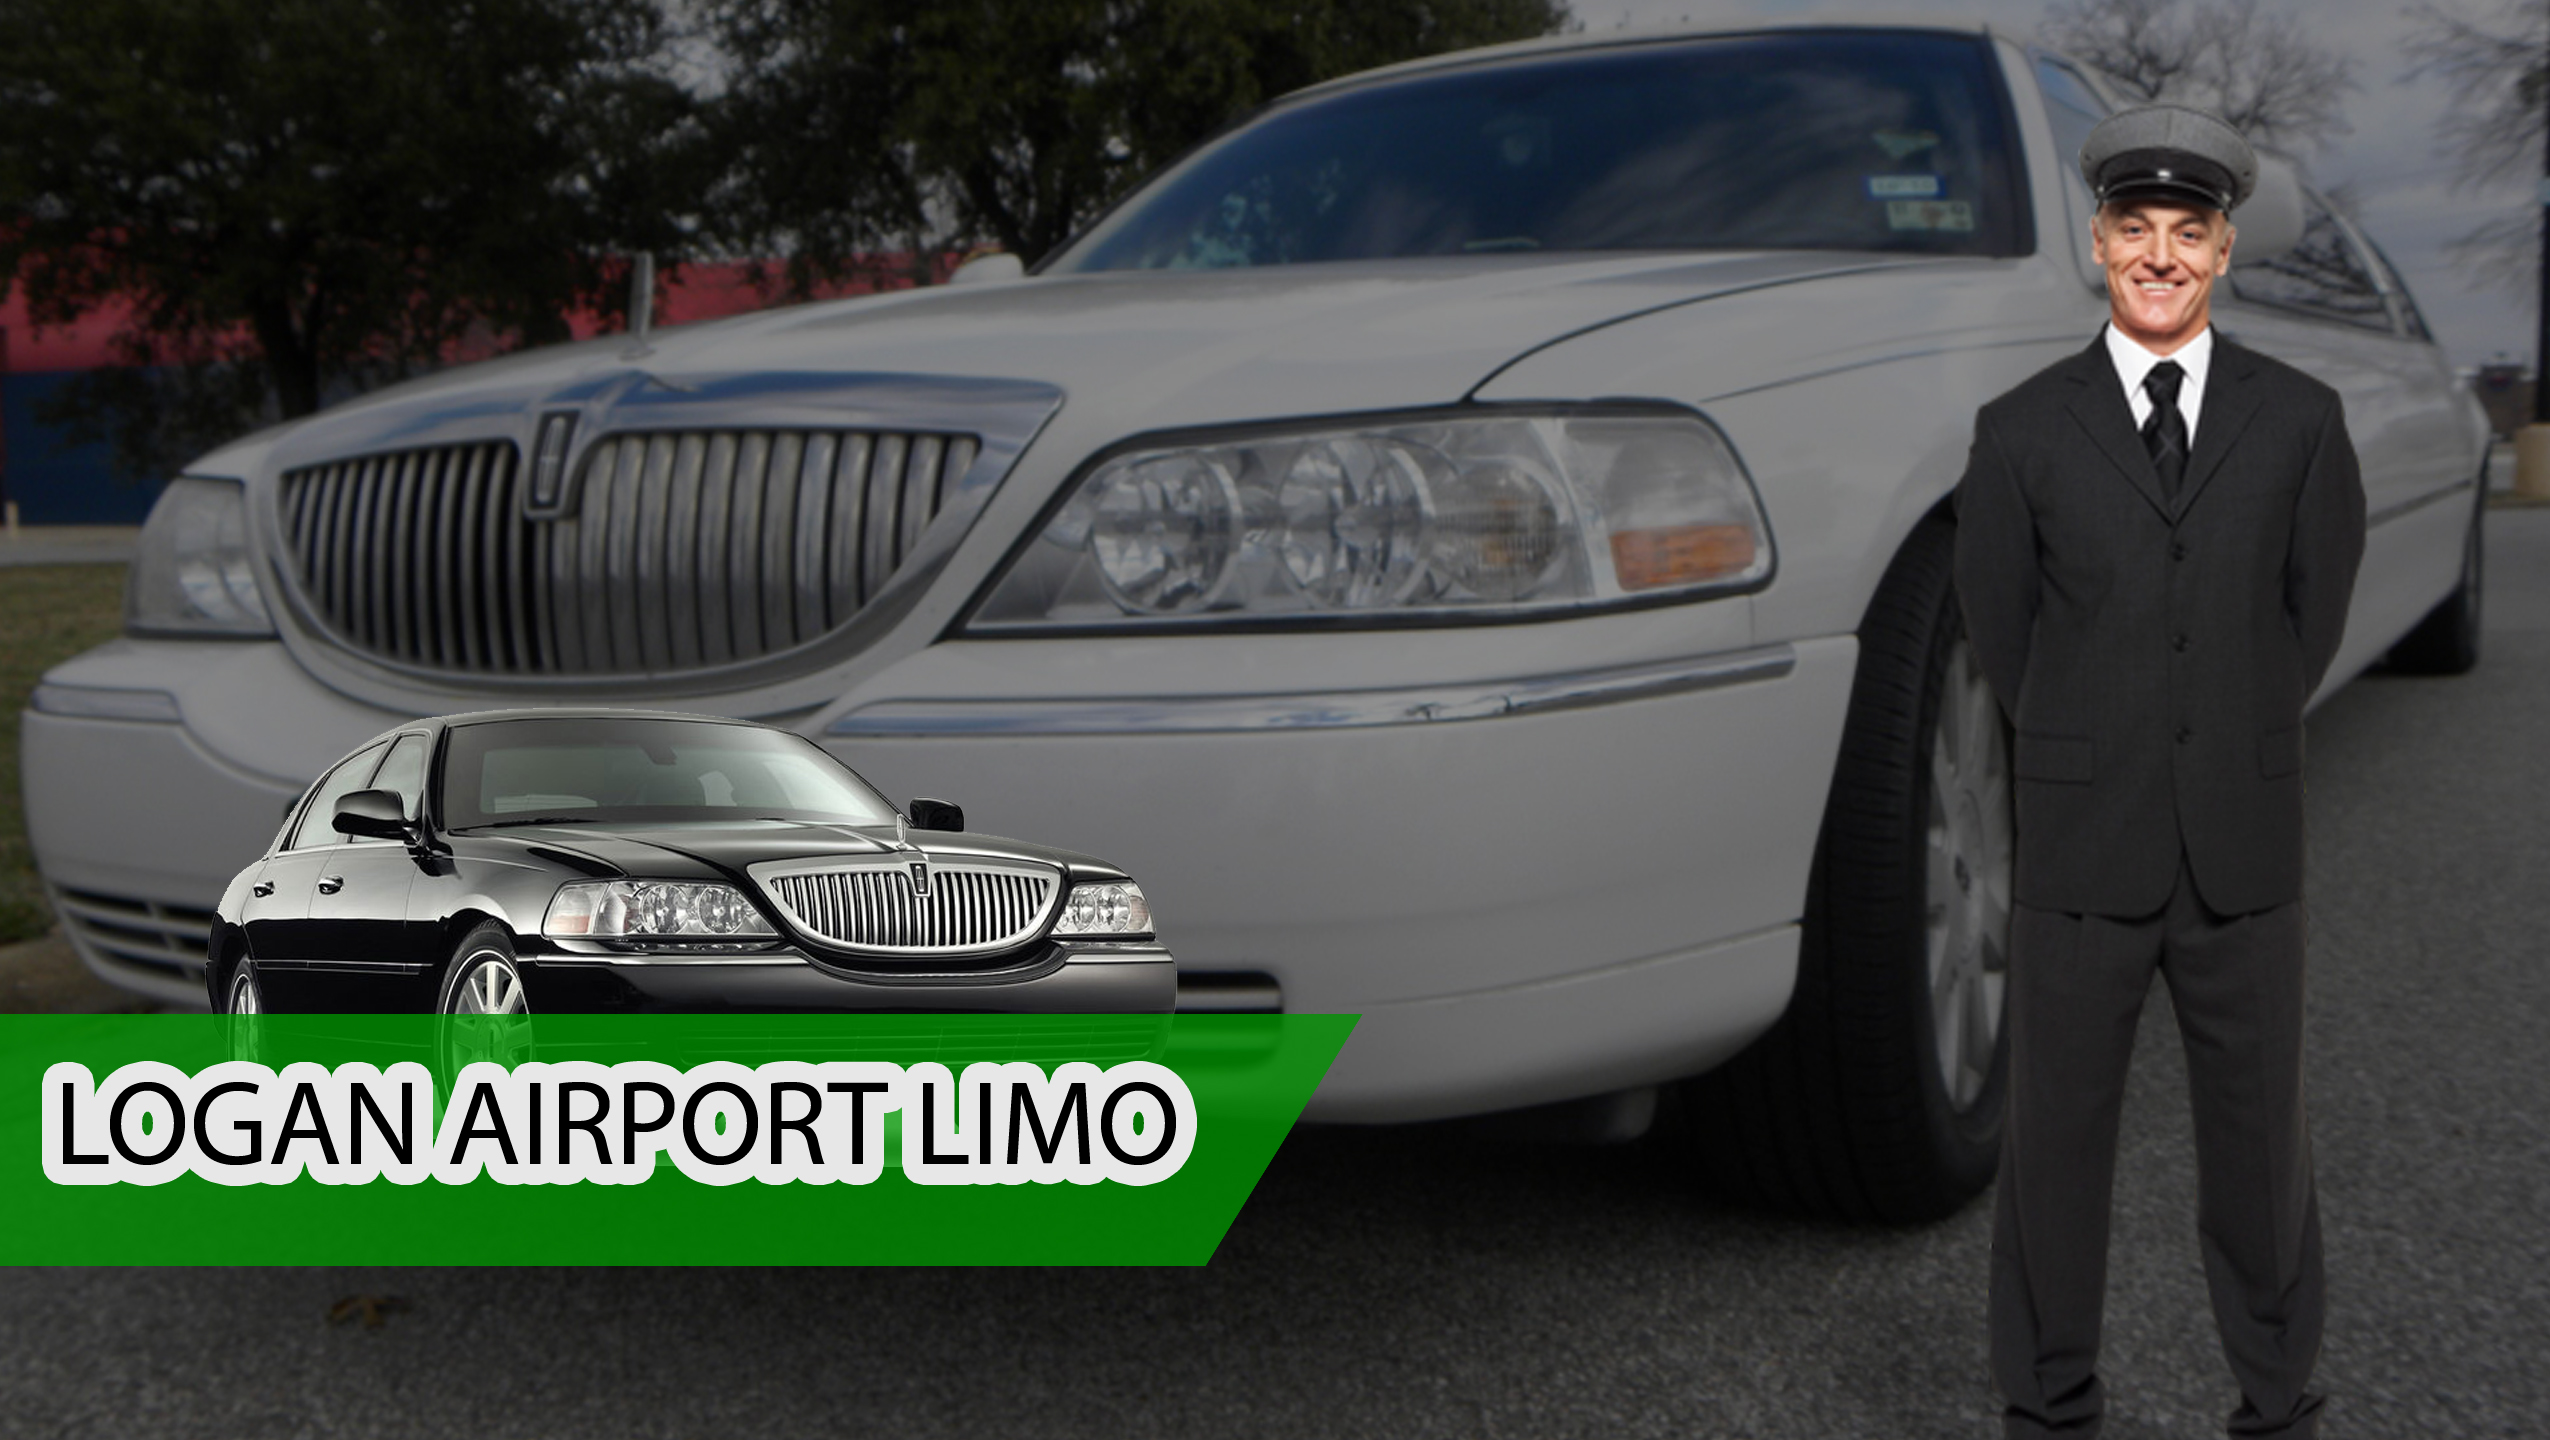 http://www.loganairportlimousines.com